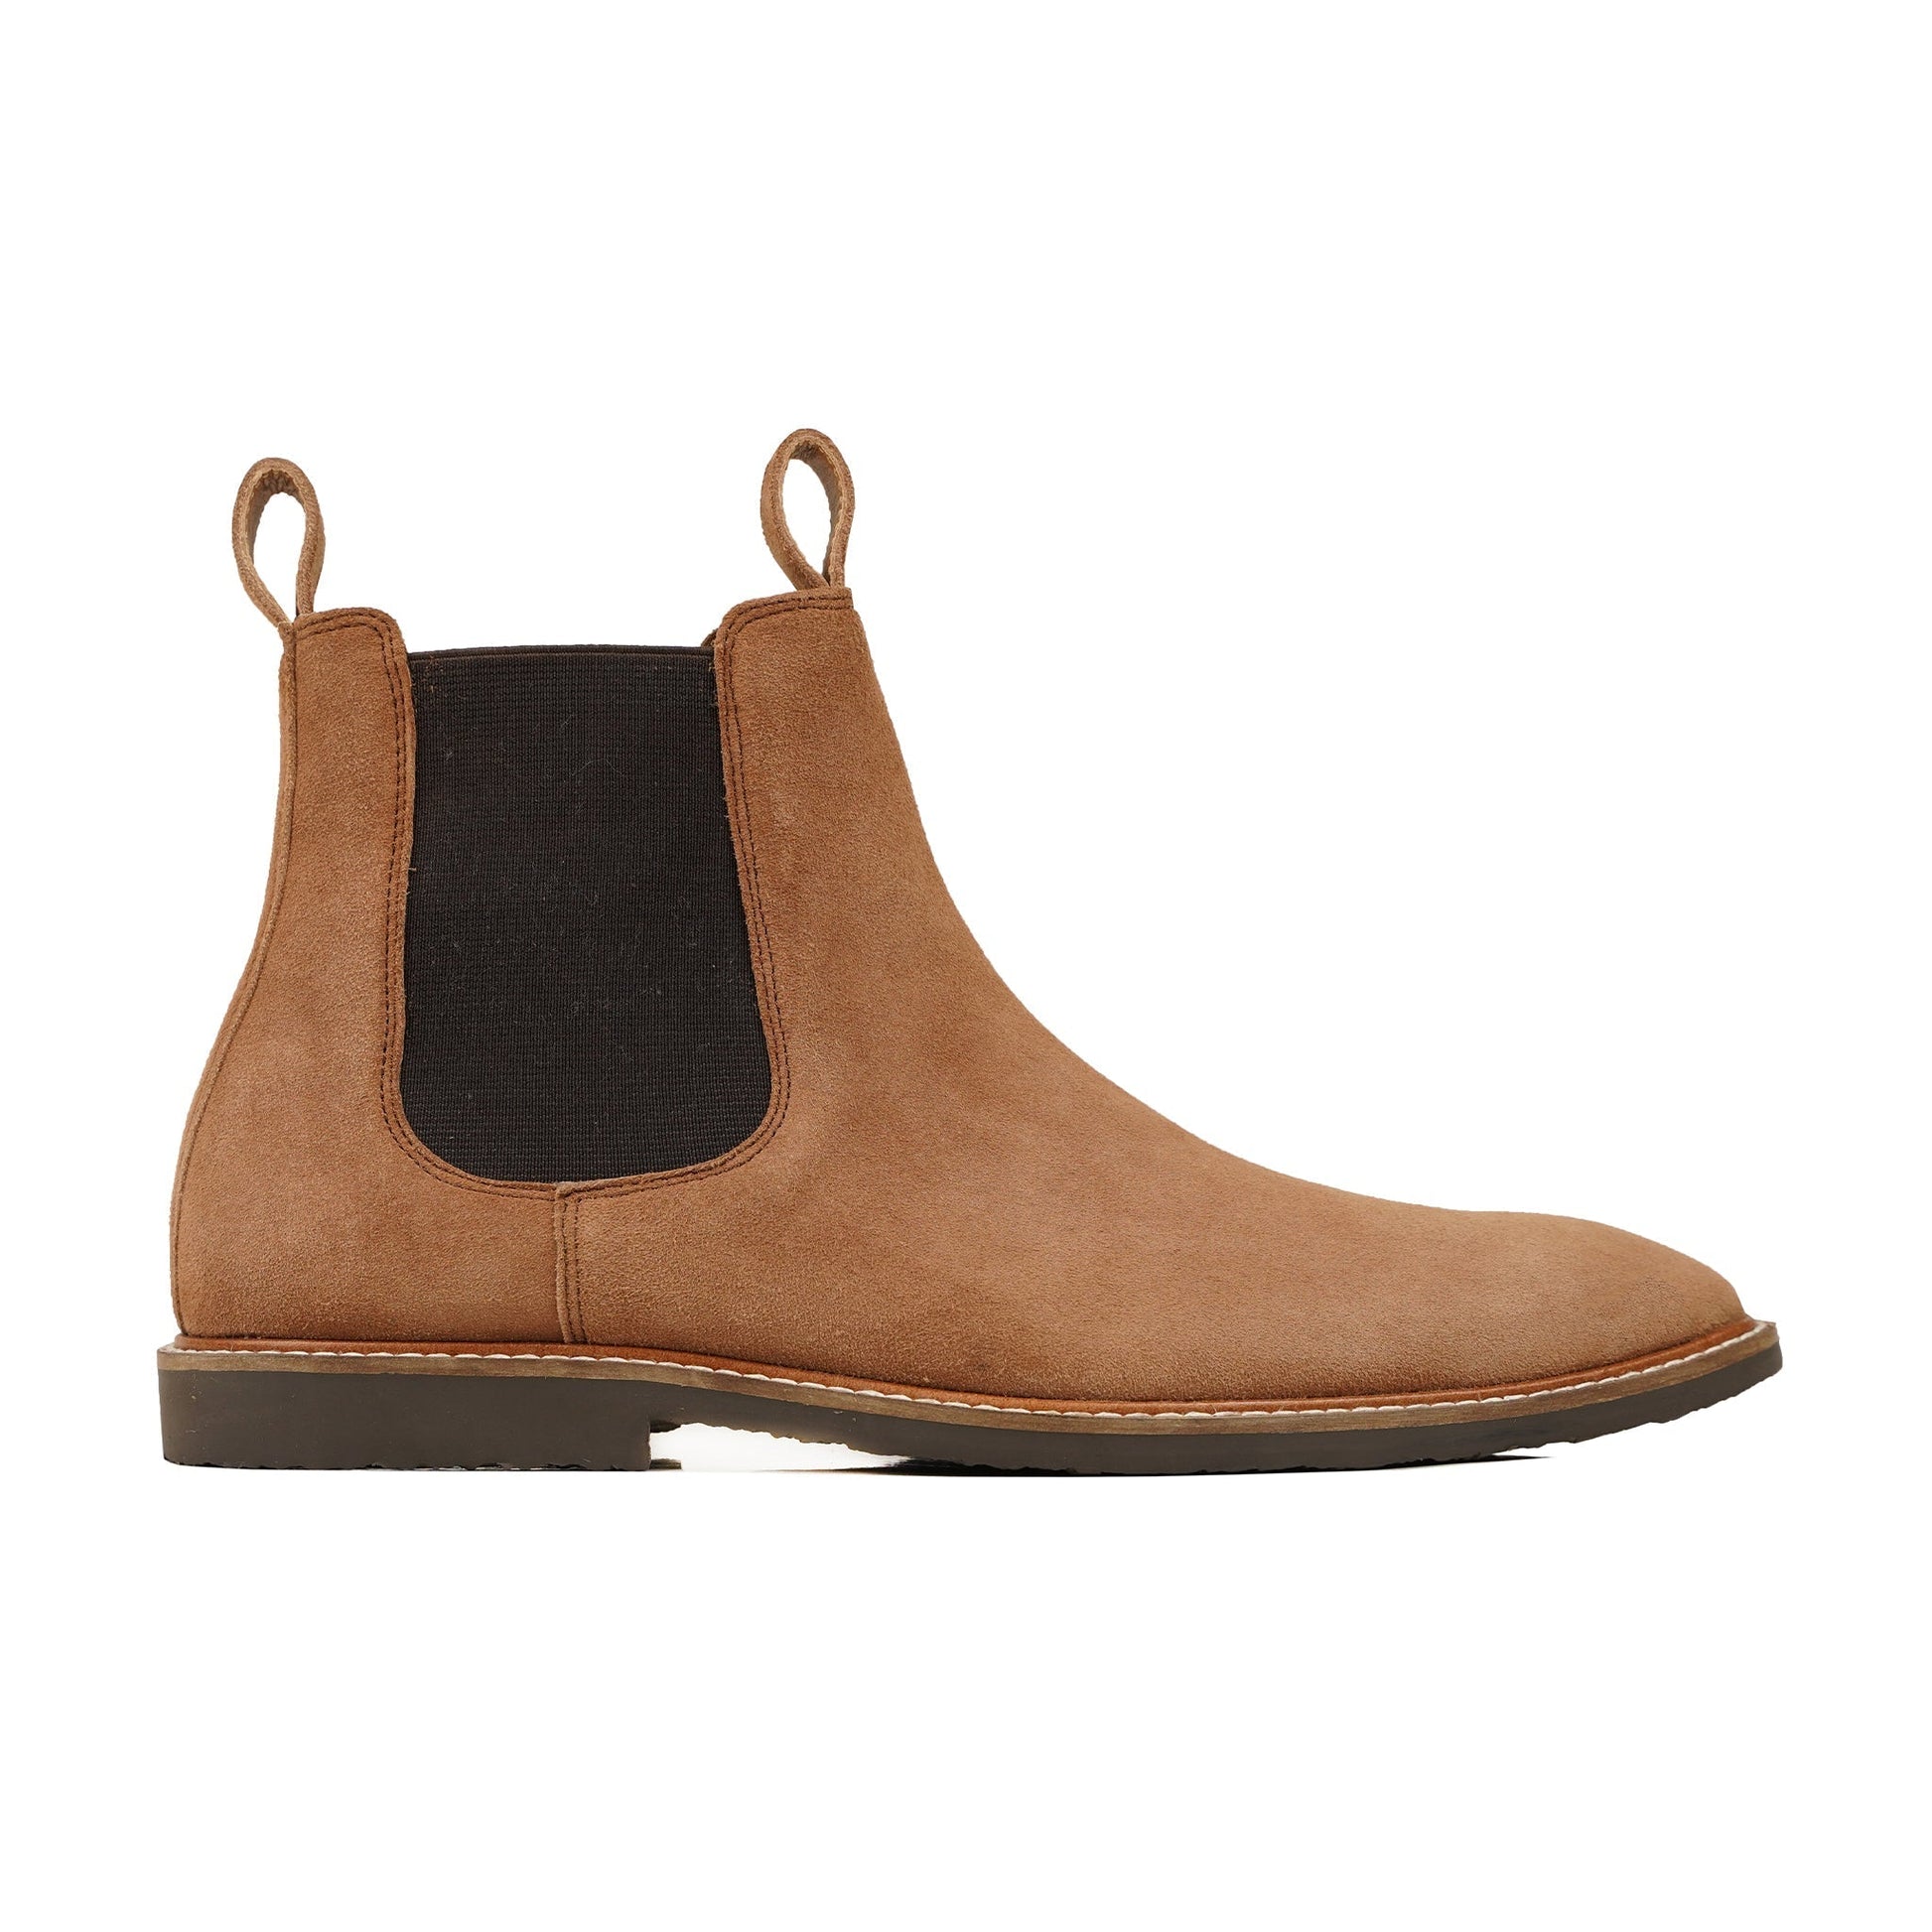 Brown Suede Chelsea With Double Pull Tab Brown Suede Chelsea With Double Pull Tab, Leather Boots